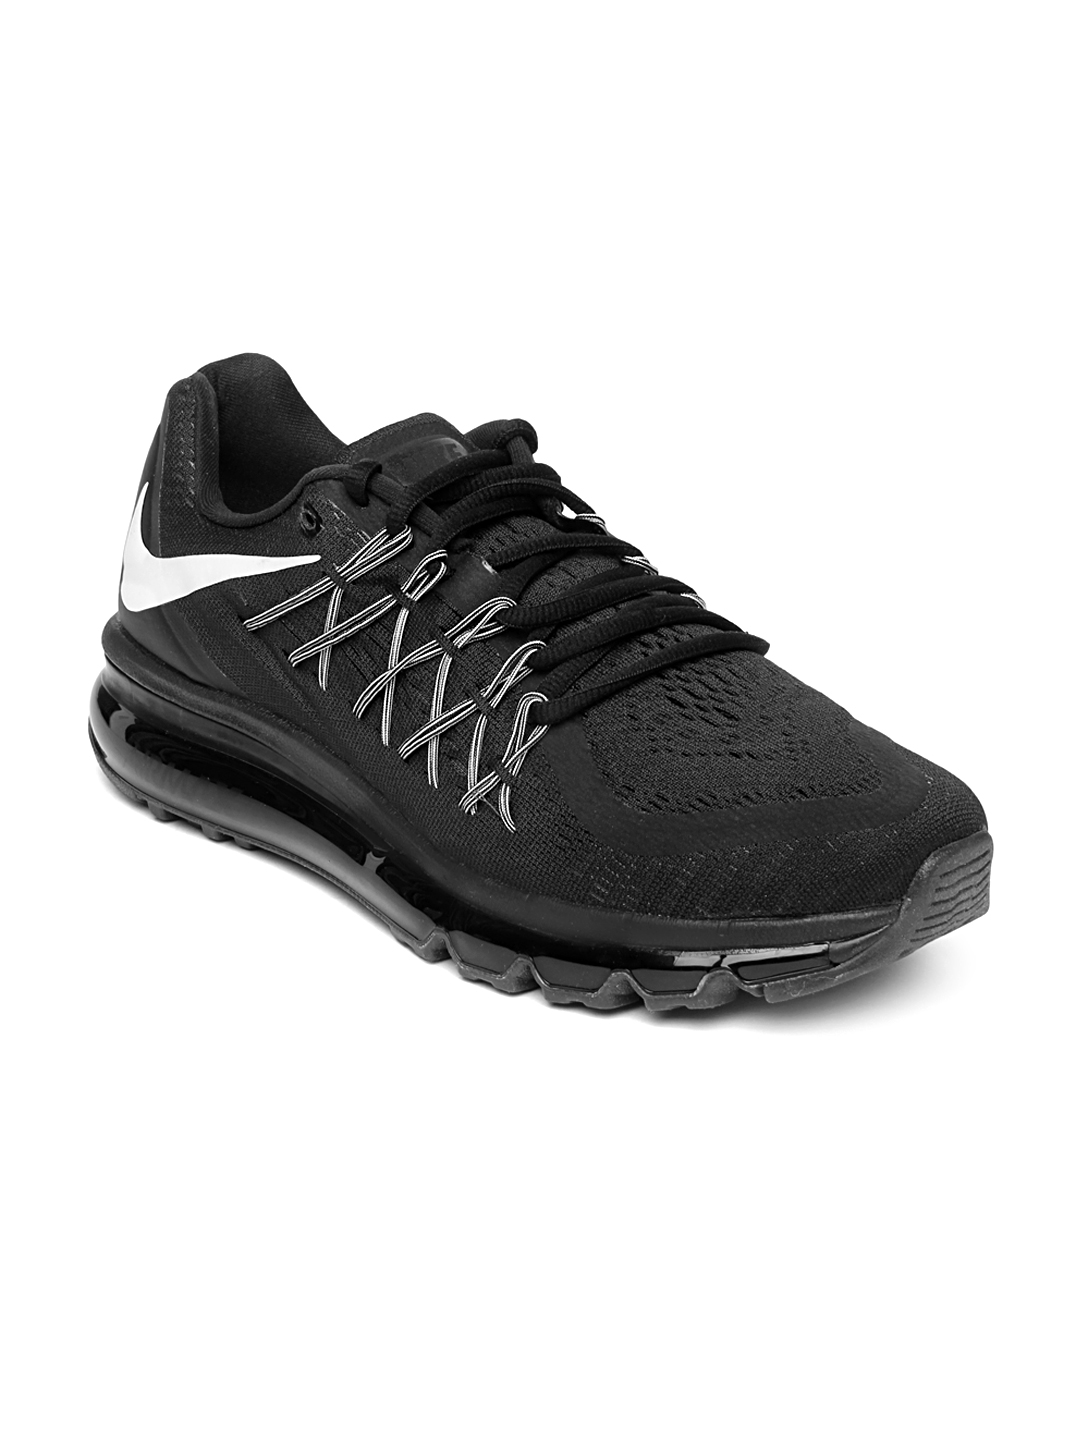 Buy Nike Black Max 2015 Running Shoes - Shoes for Men 549052 |